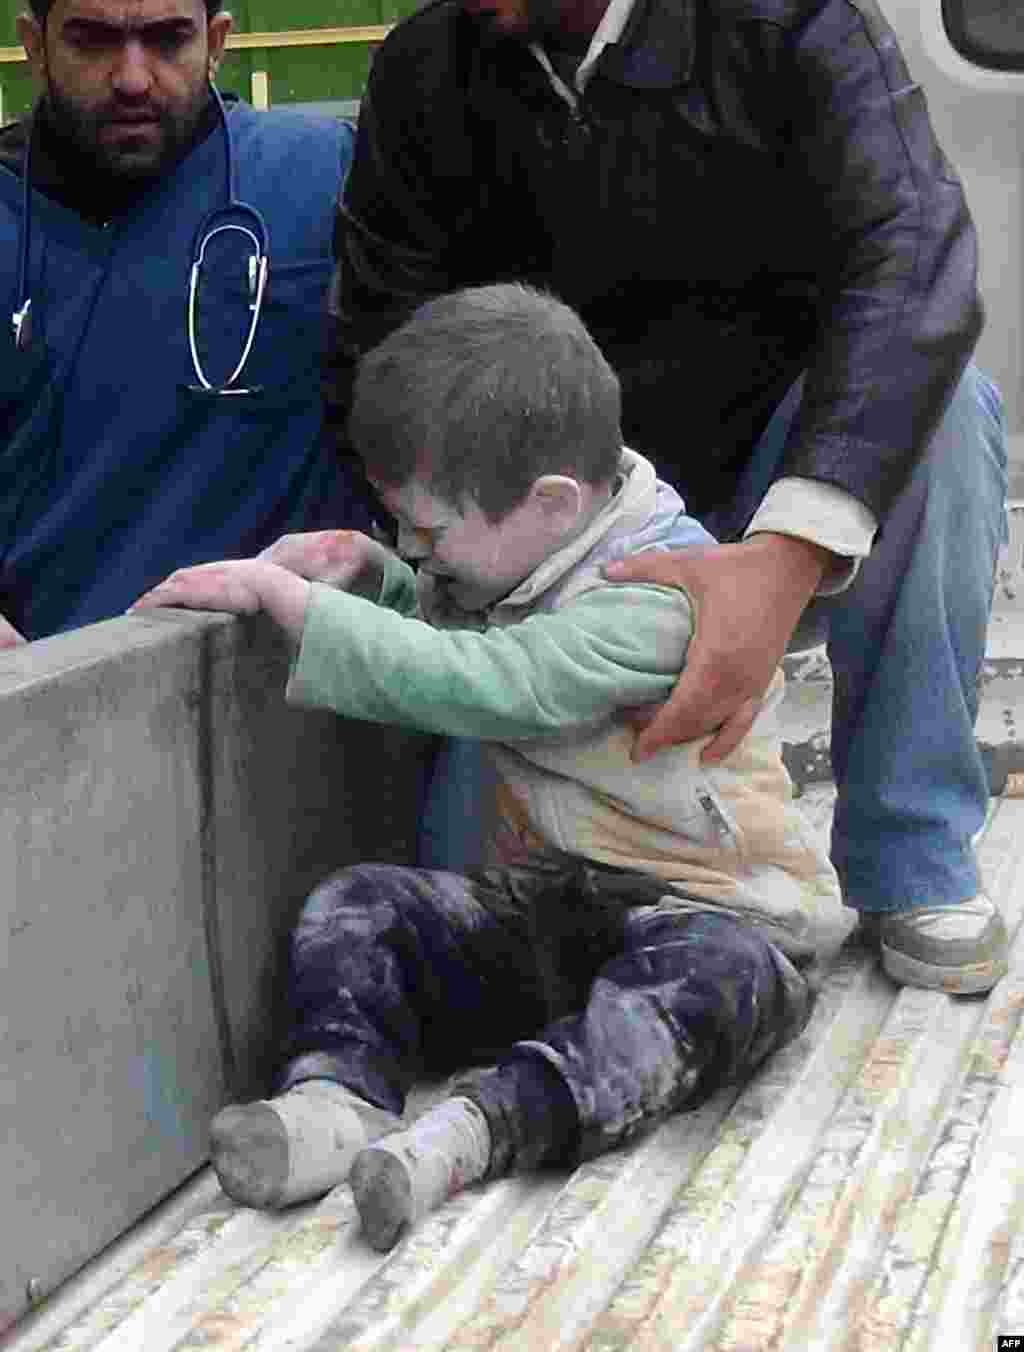 Syrians help an injured child following an alleged airstrike by government forces near a school in the northern city of Aleppo.